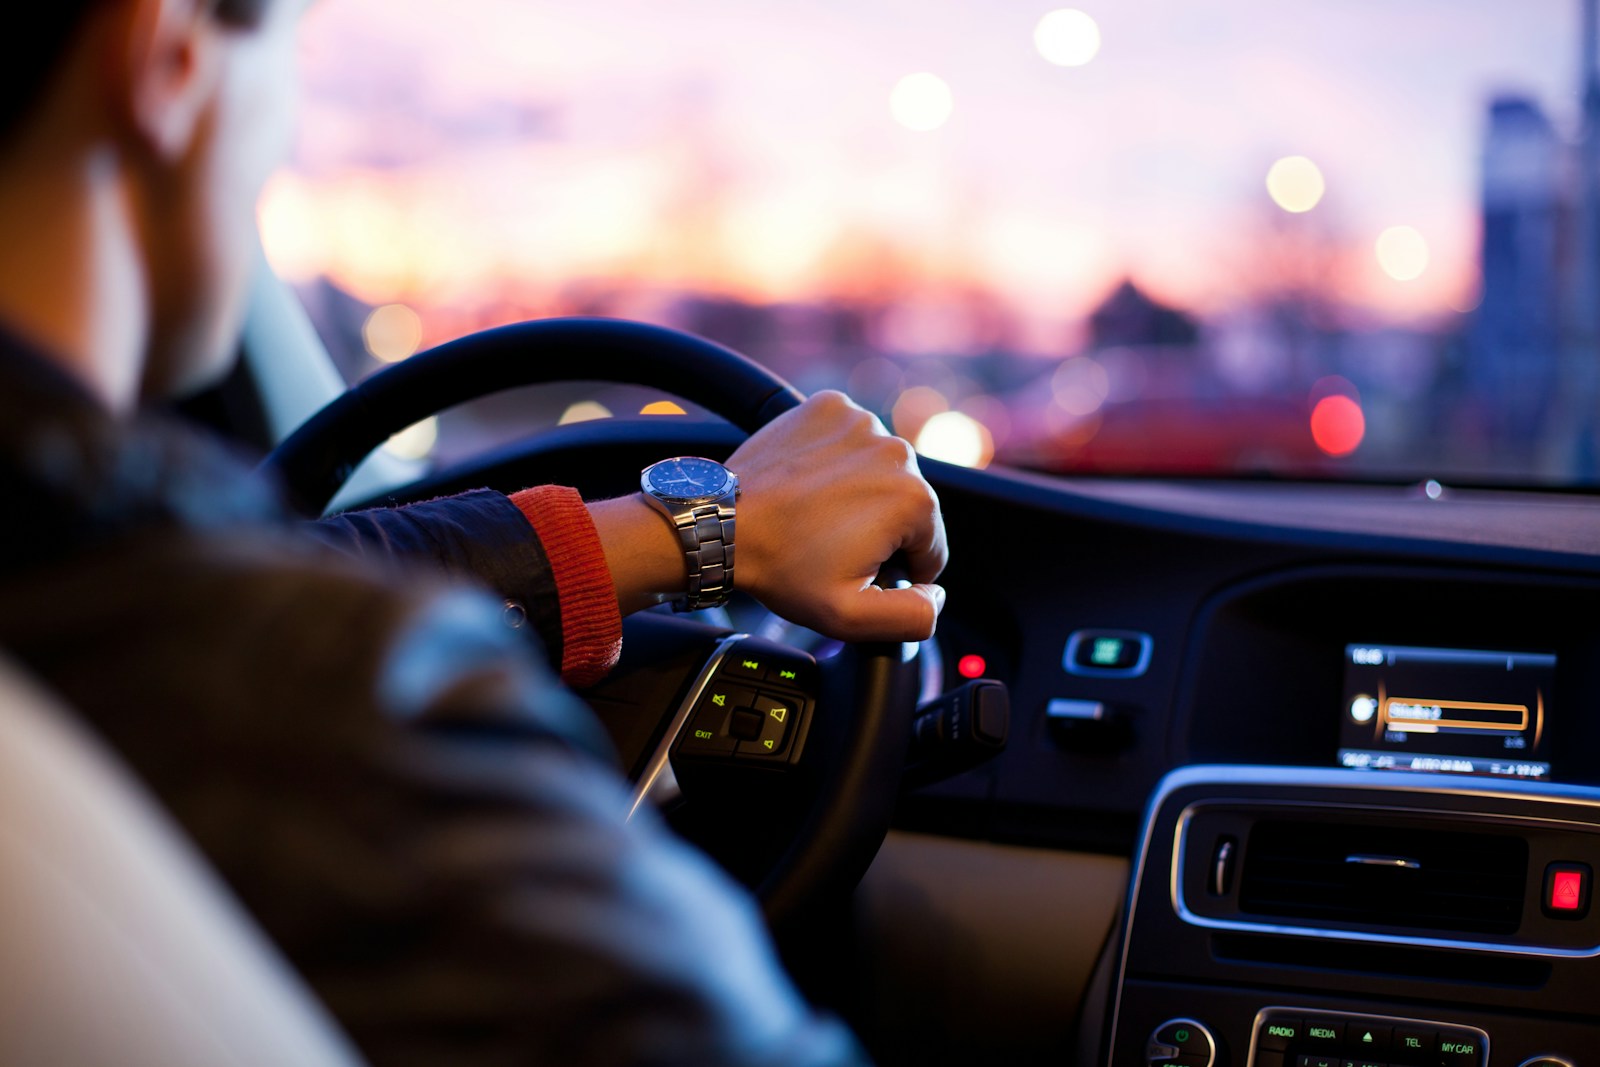 man driving a car protected by auto insurance wearing wrist watch